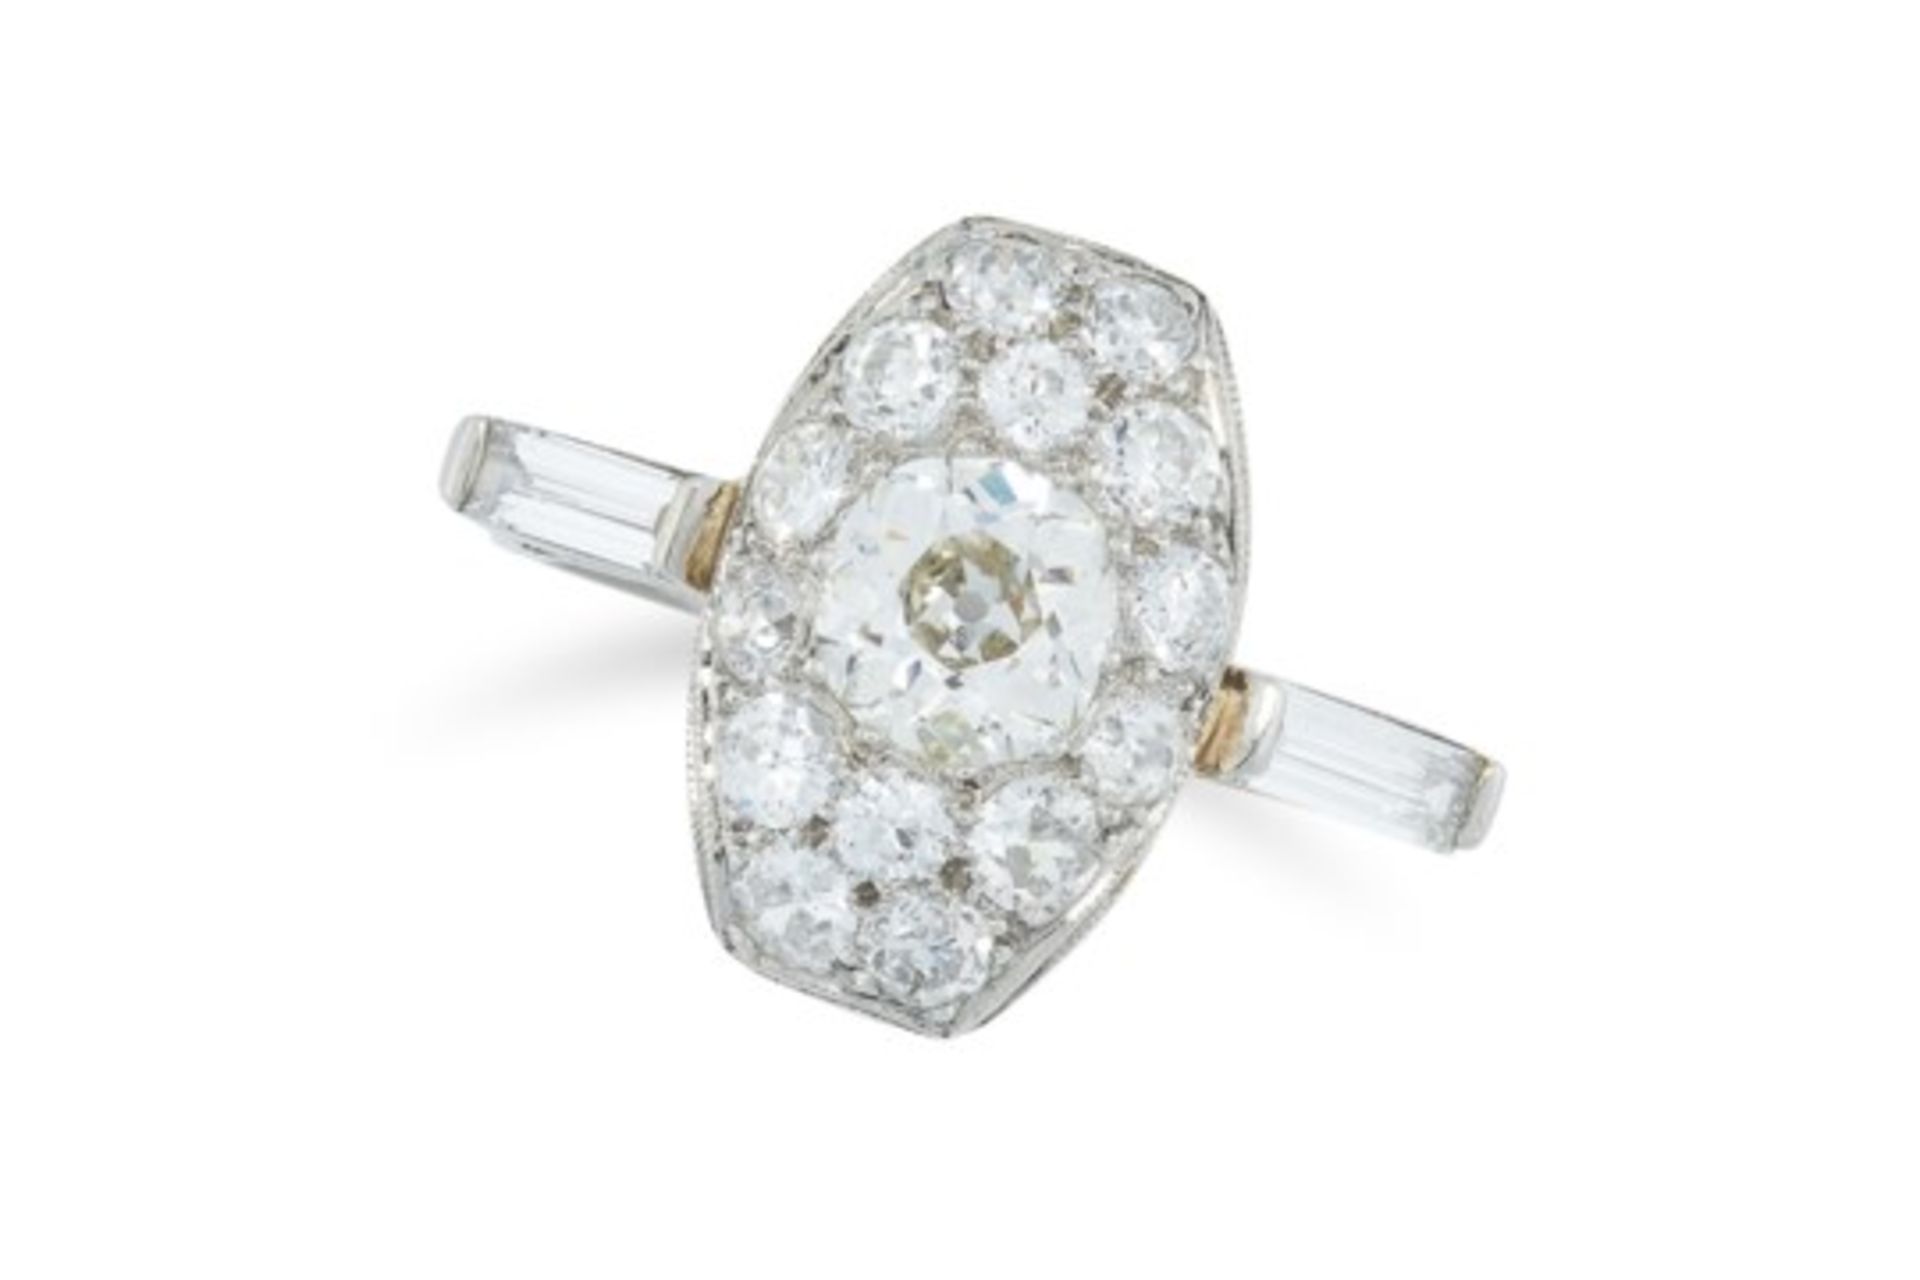 A DIAMOND DRESS RING the oval face set with round old cut diamonds totalling 2.2-2.6 carats, between